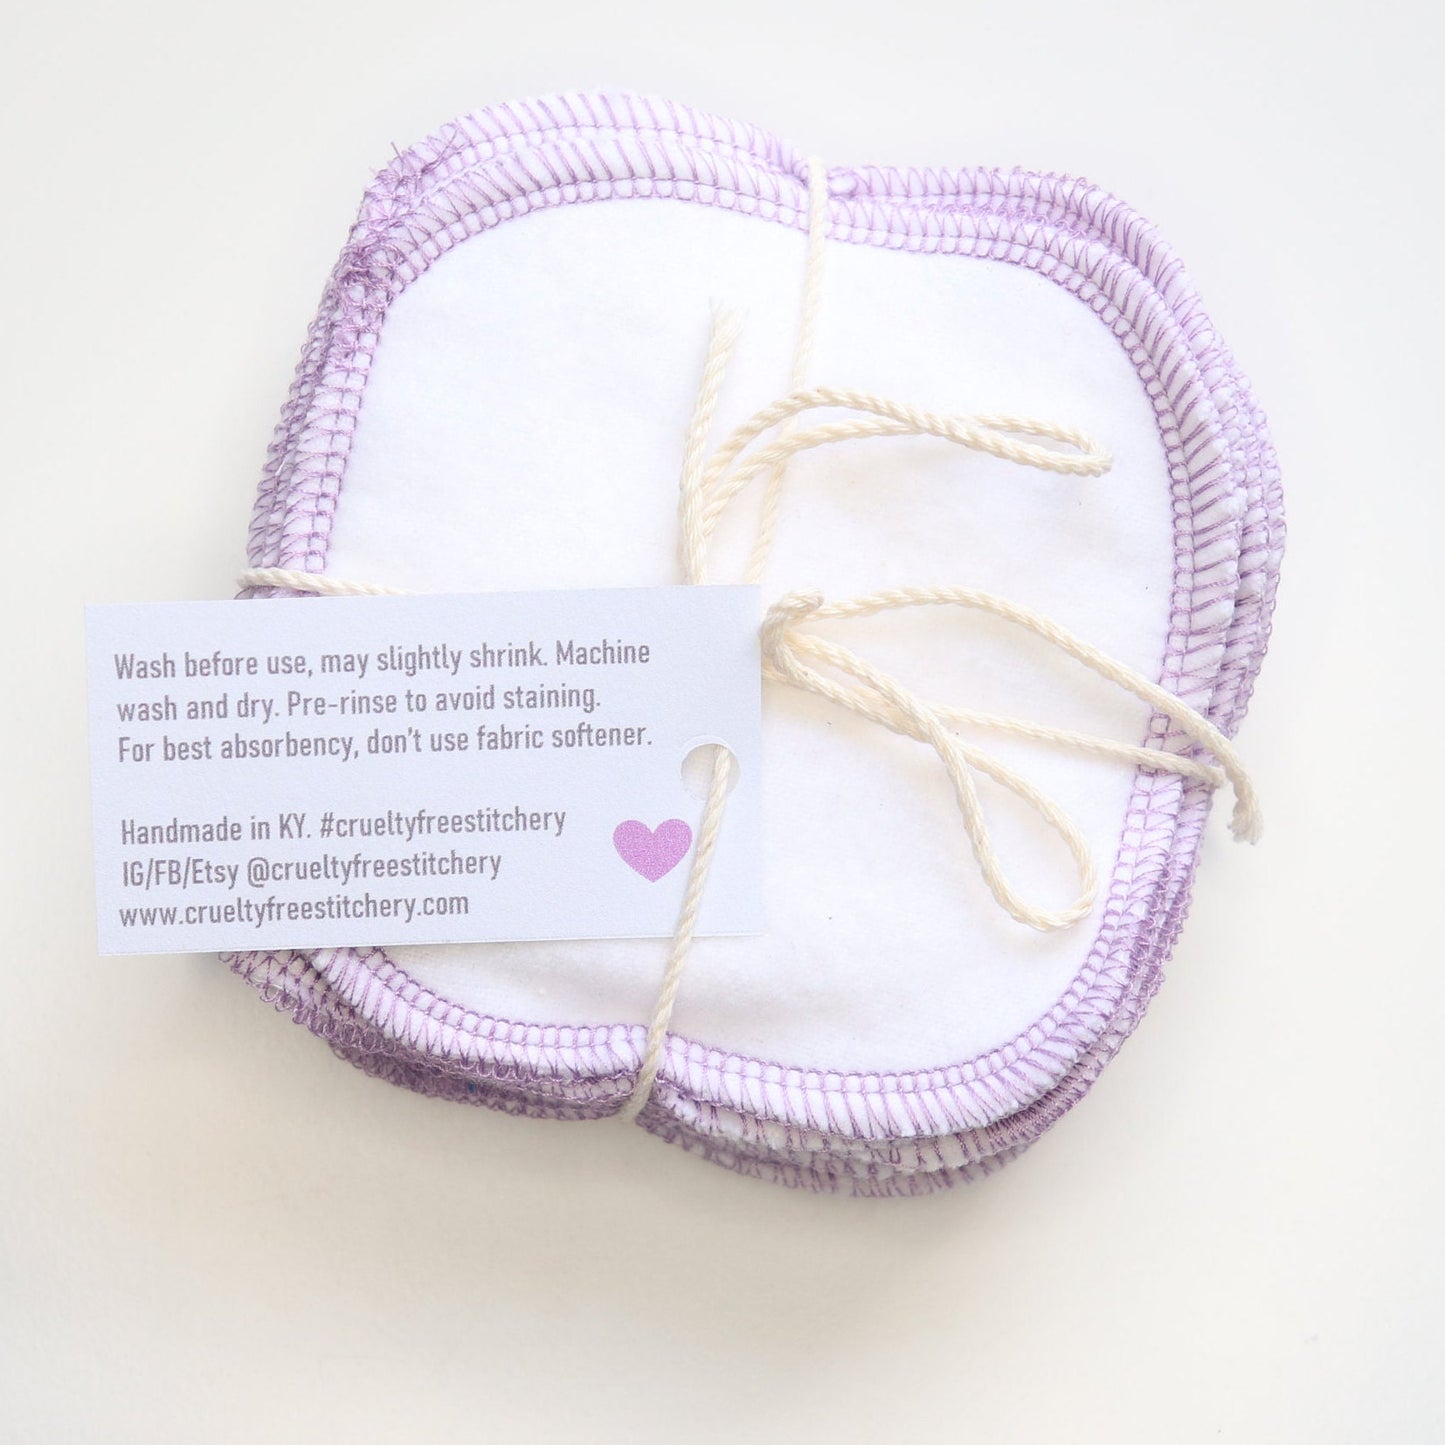 Bundle of white reusable cotton rounds with the back of the small paper tag showing with care instructions.